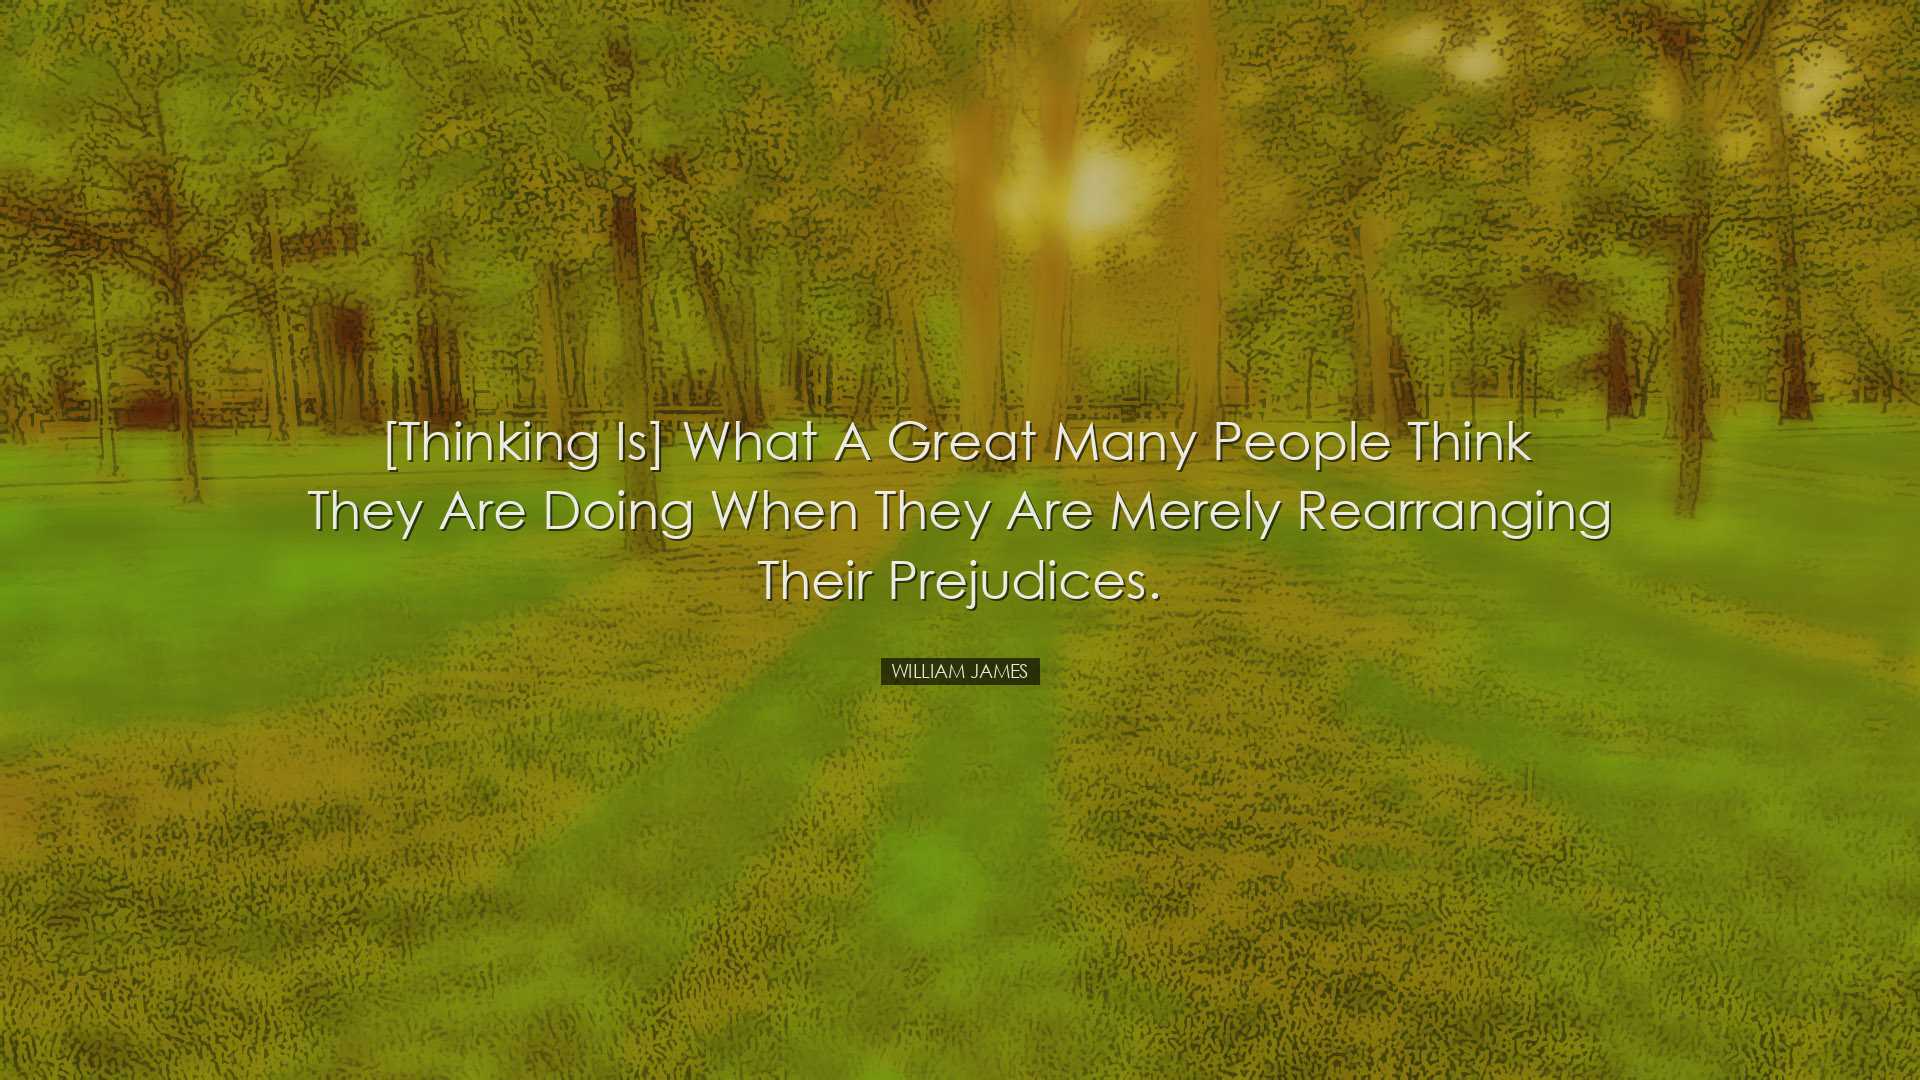 [Thinking is] what a great many people think they are doing when t